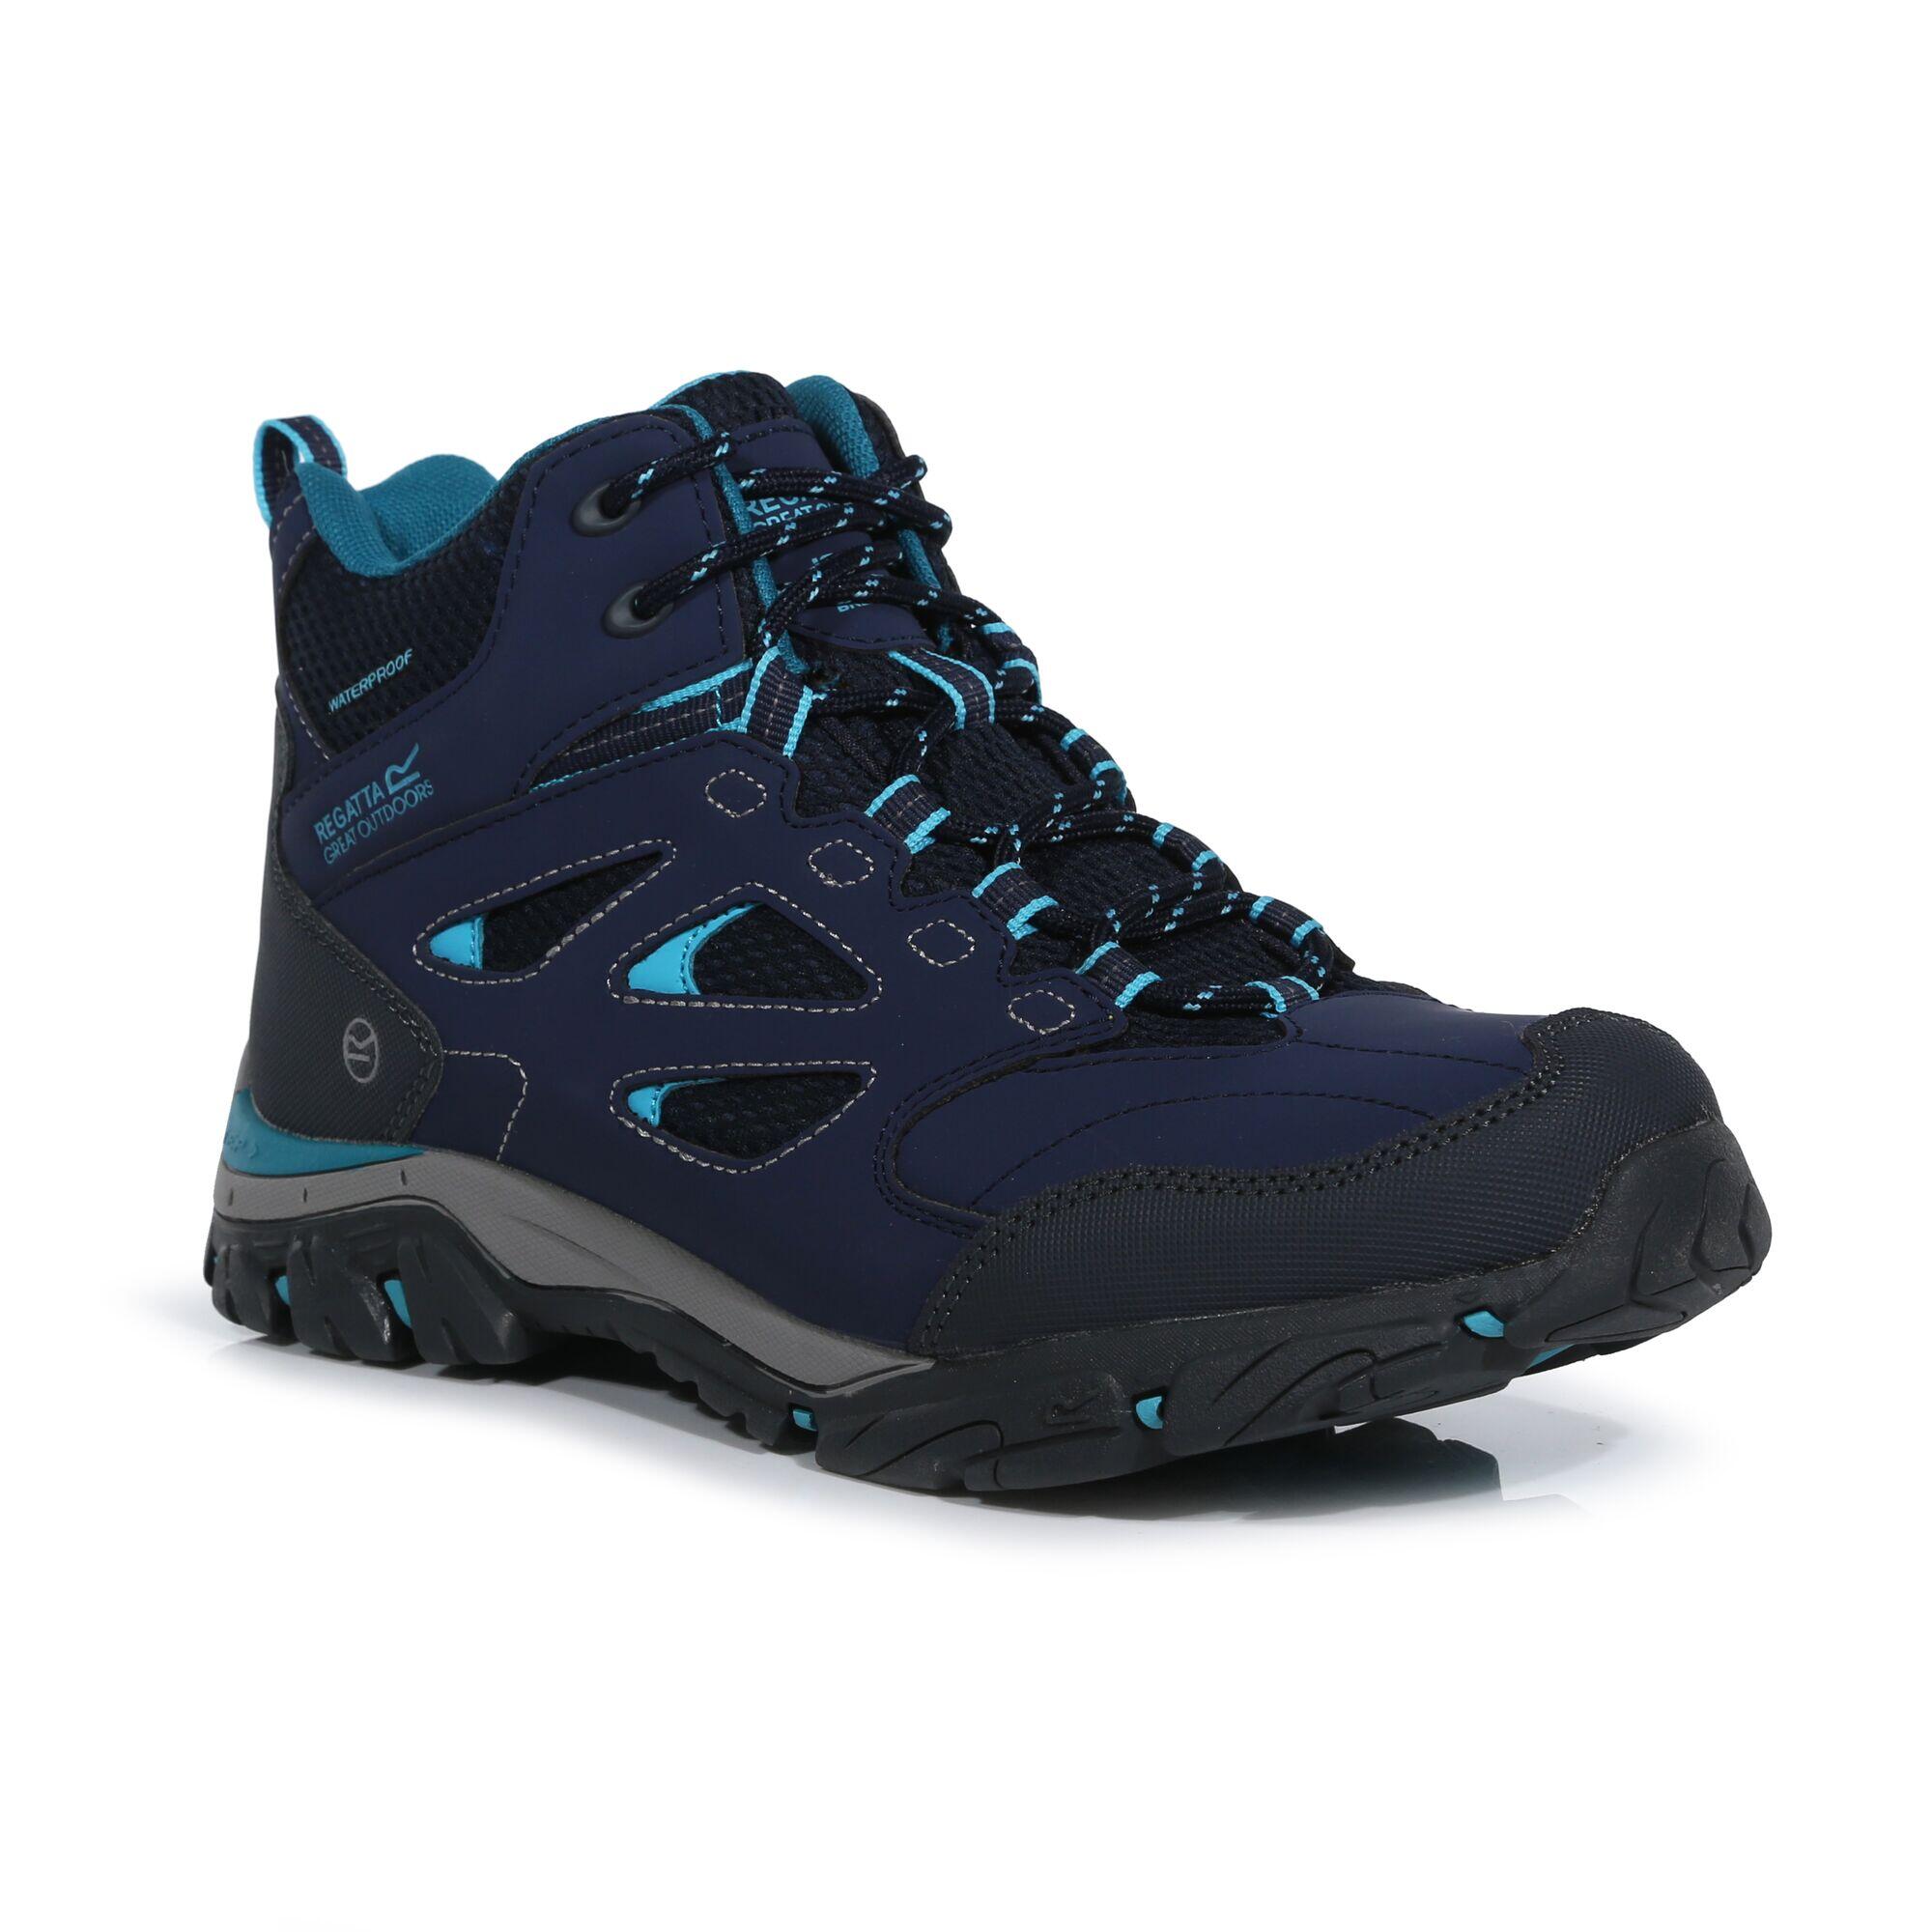 Lady Holcombe IEP Mid Women's Hiking Boots - Navy 2/5